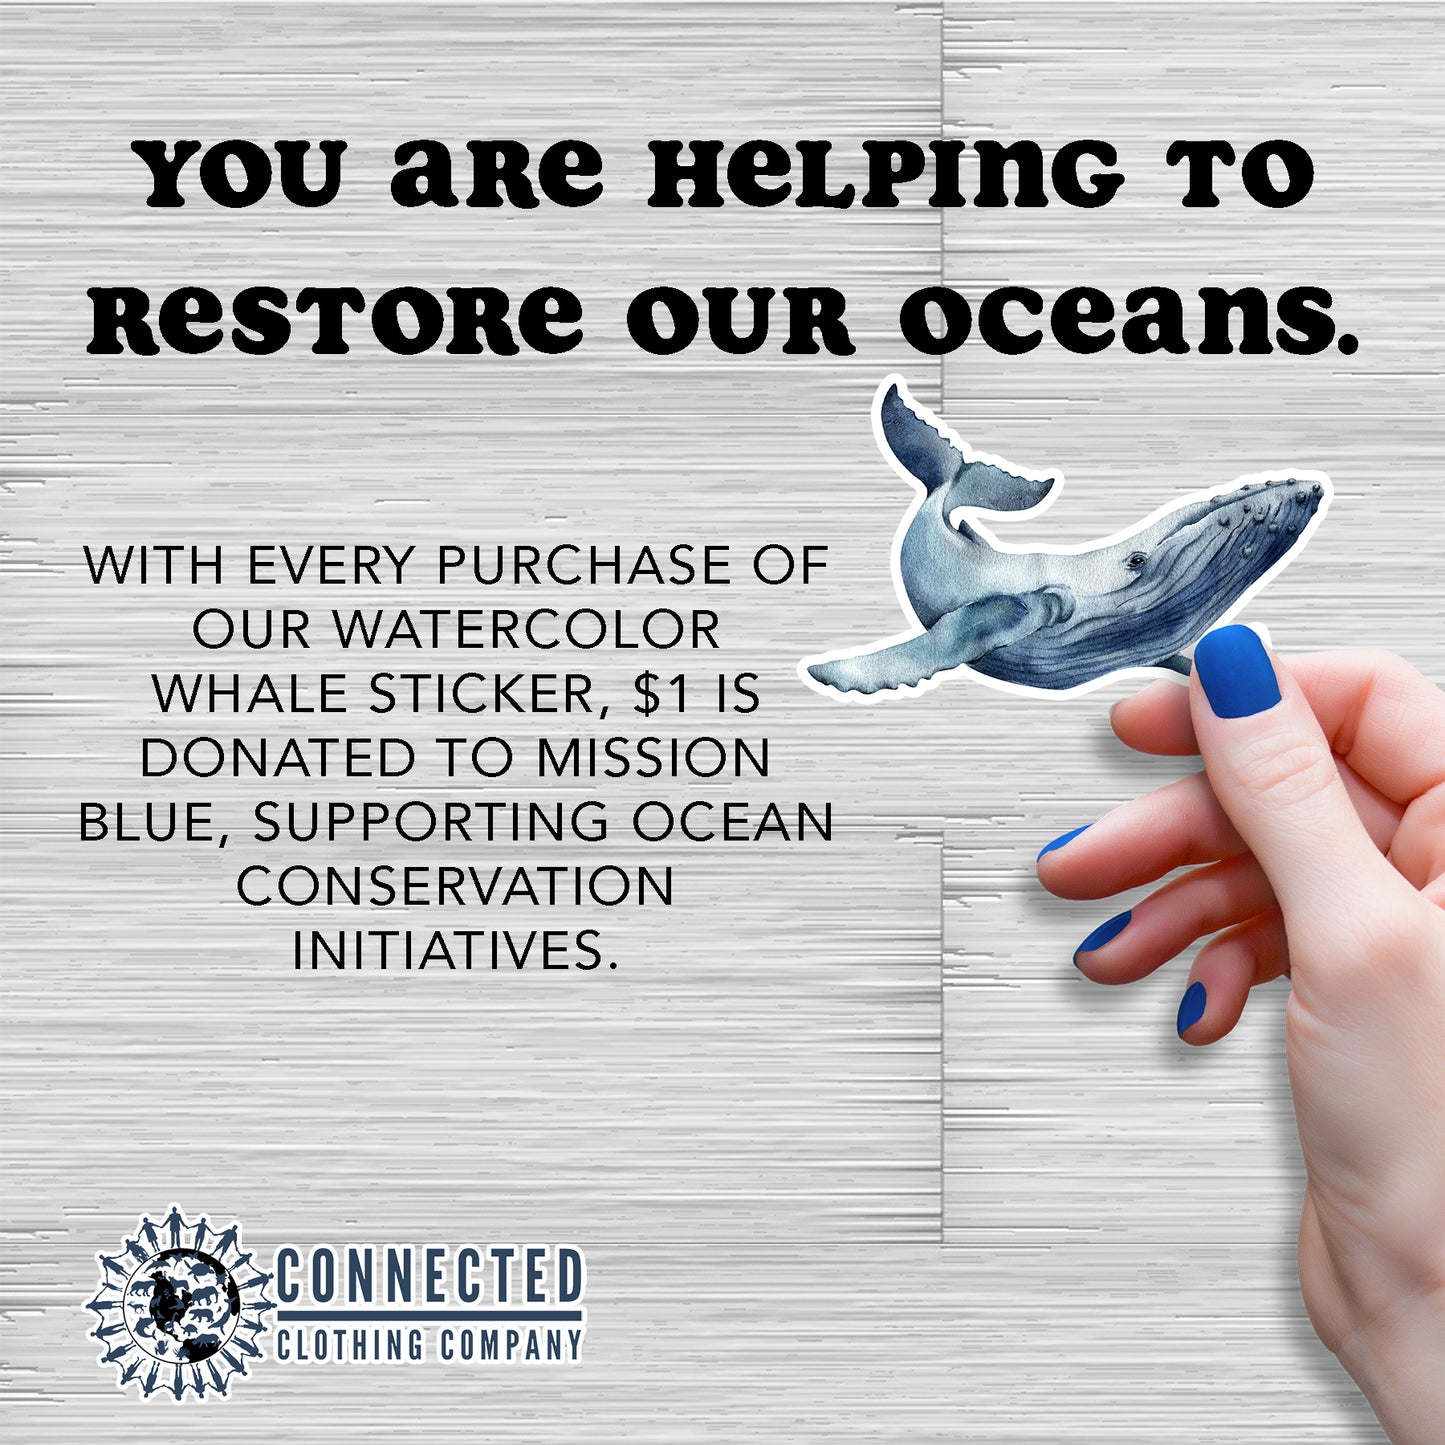 You are helping to restore our oceans. With every purchase of our watercolor whale sticker, 10% of the net proceeds are donated to Mission Blue to continue their efforts in creating marine protected areas, or "Hope Spots" supporting ocean conservation initiatives